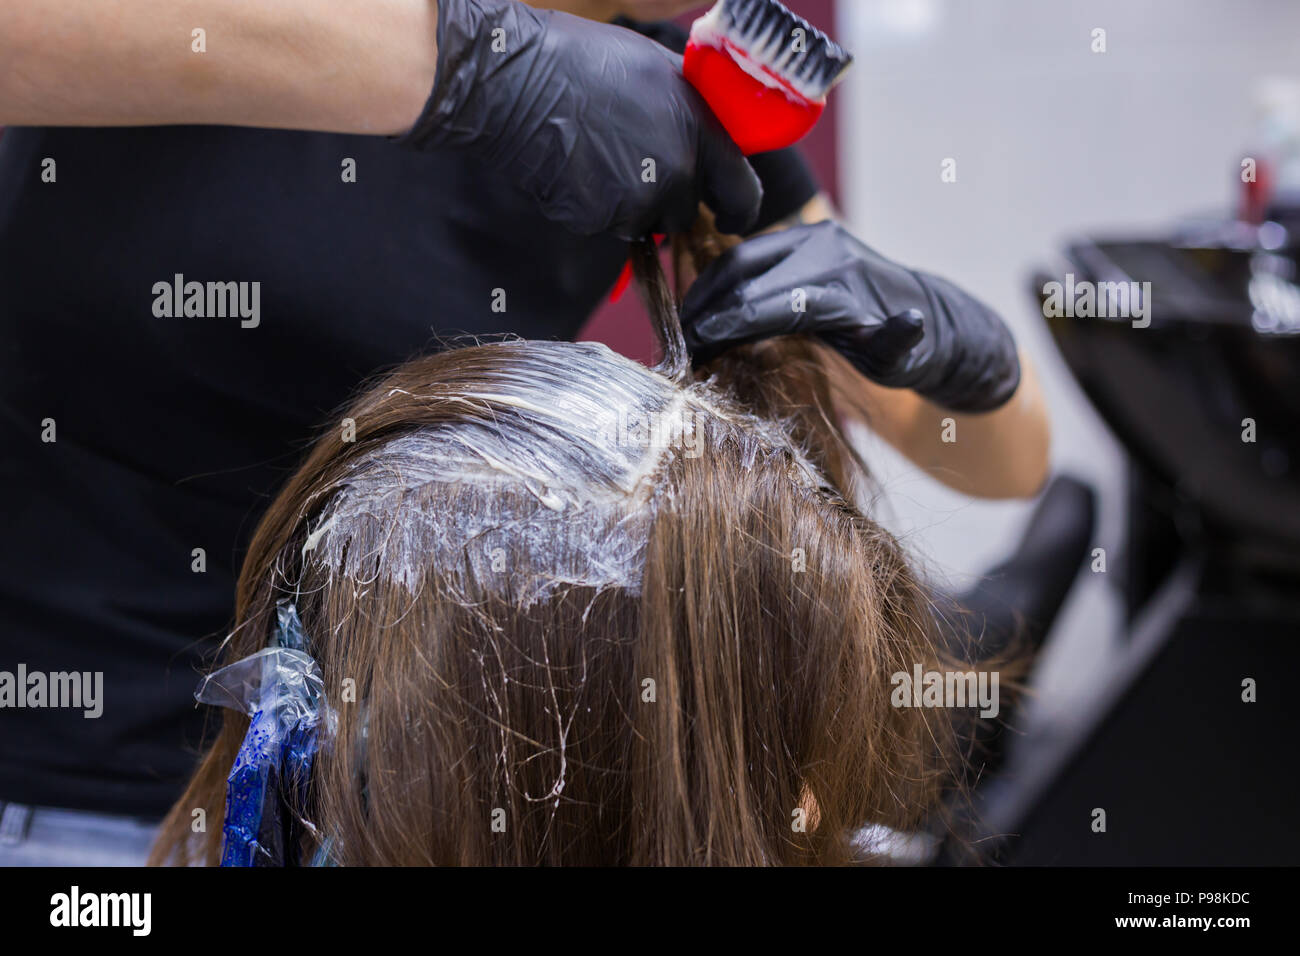 Professional hairdresser coloring hair of woman client at studio Stock Photo